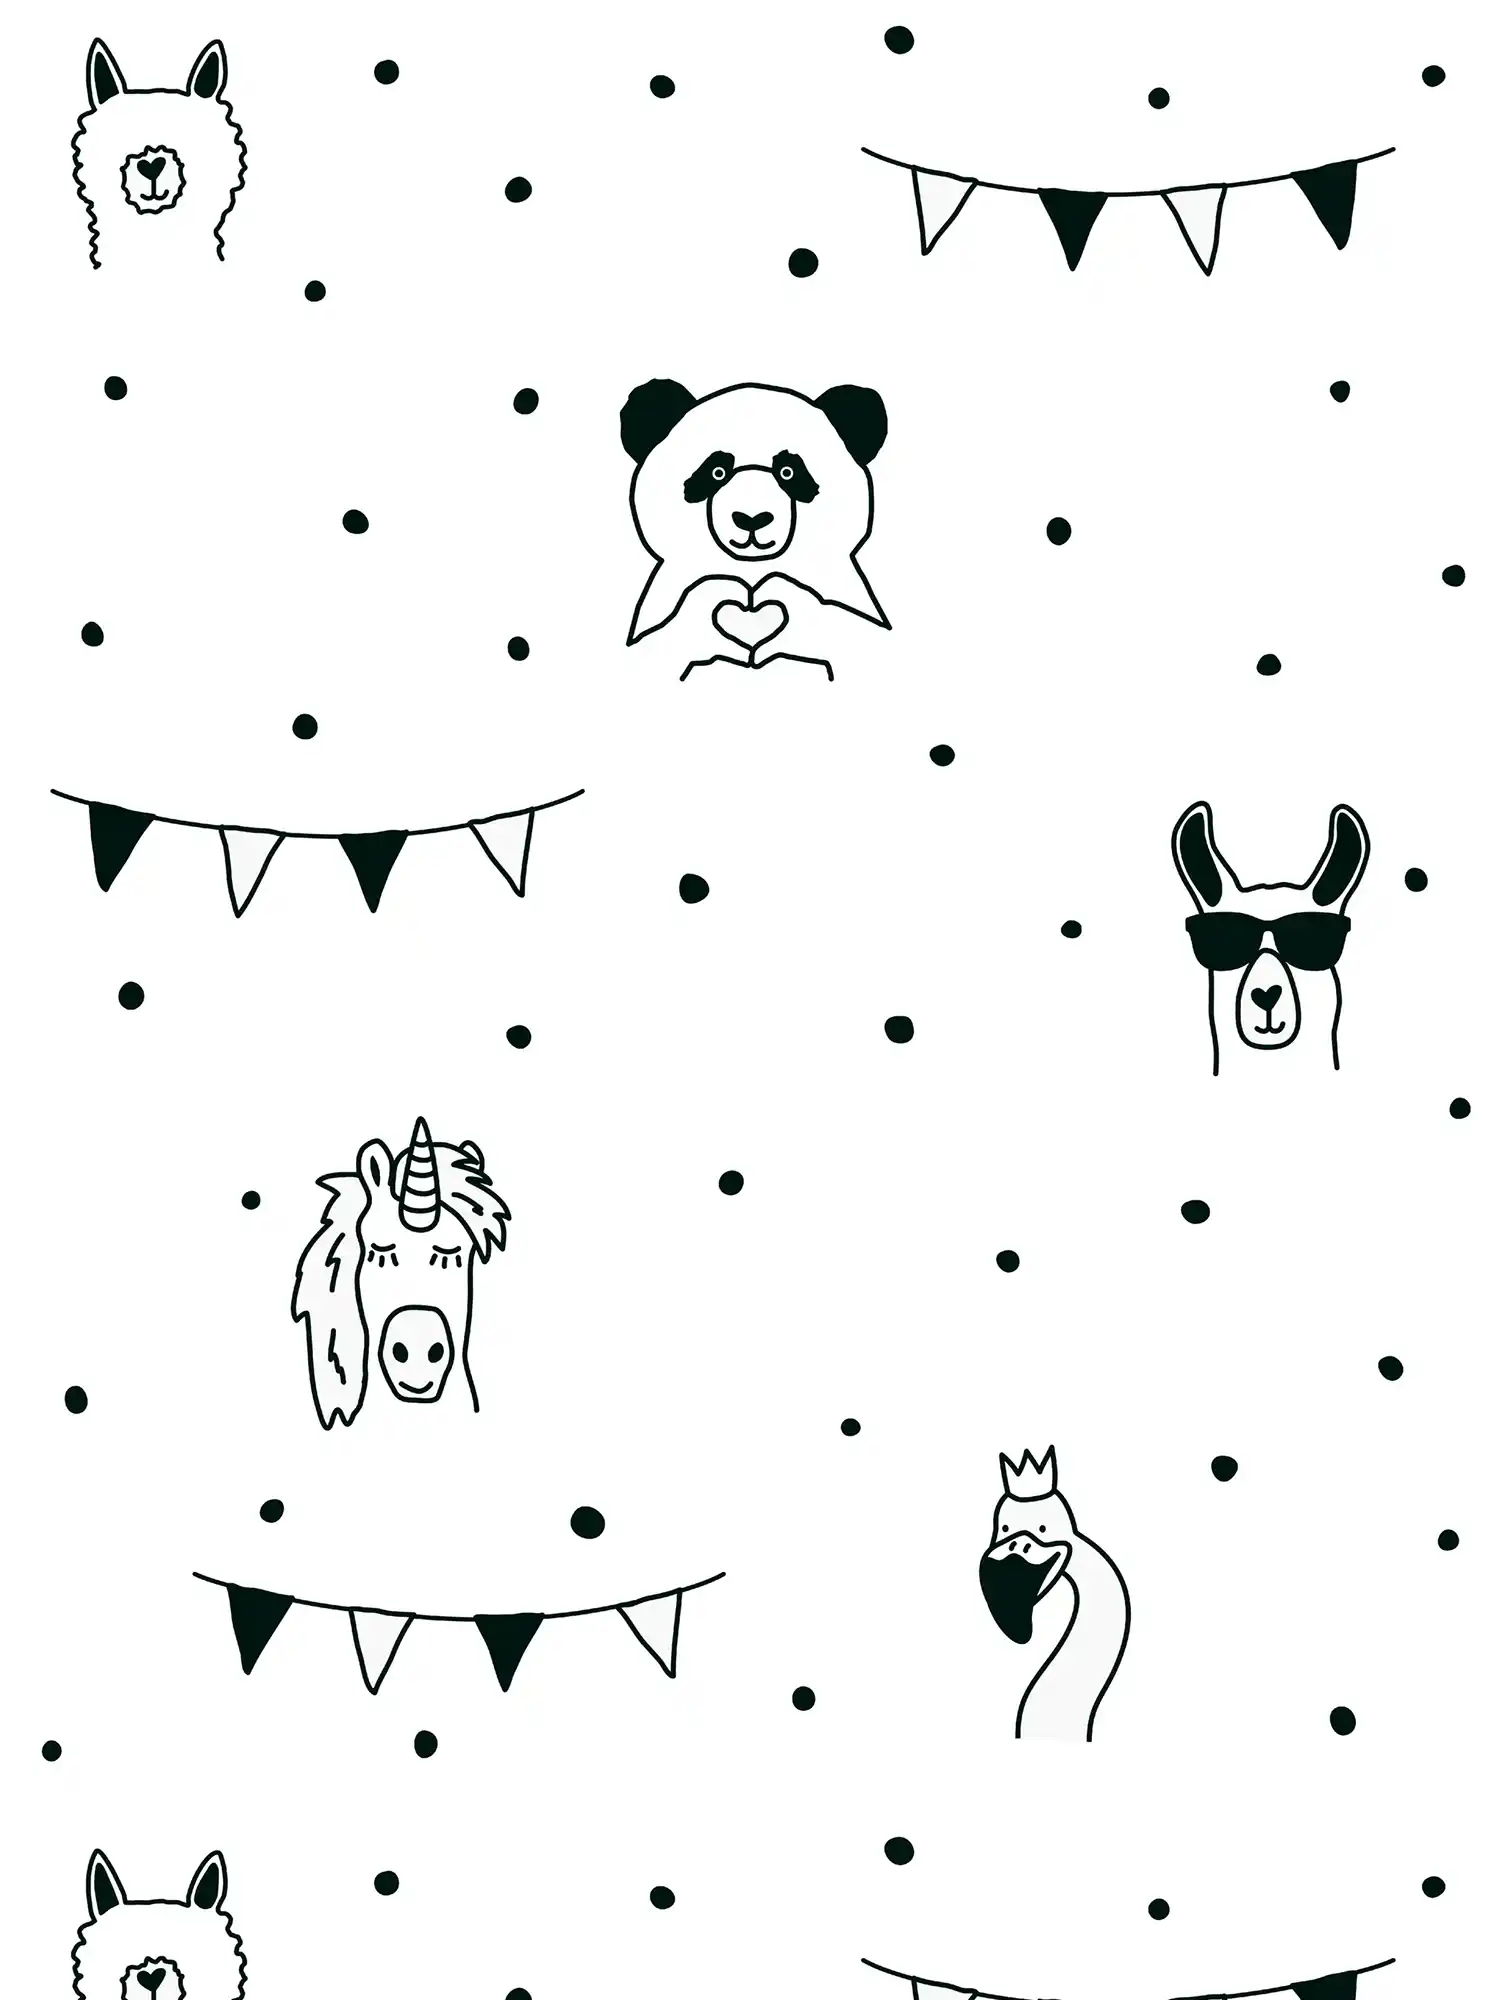 Black and white children wallpaper with animal & dots pattern
